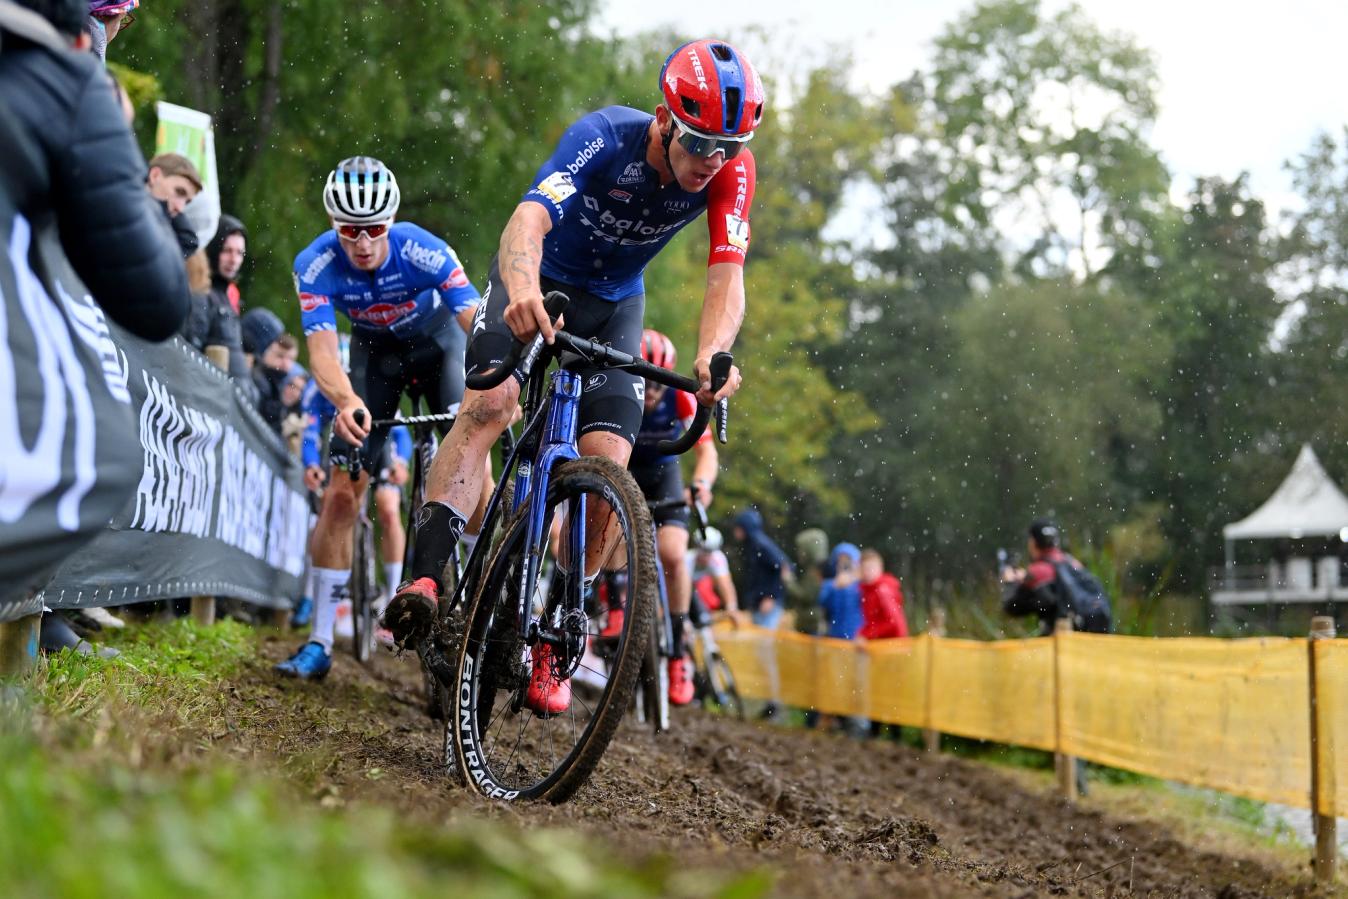 Thibau Nys will be a rider to watch in Maasmechelen